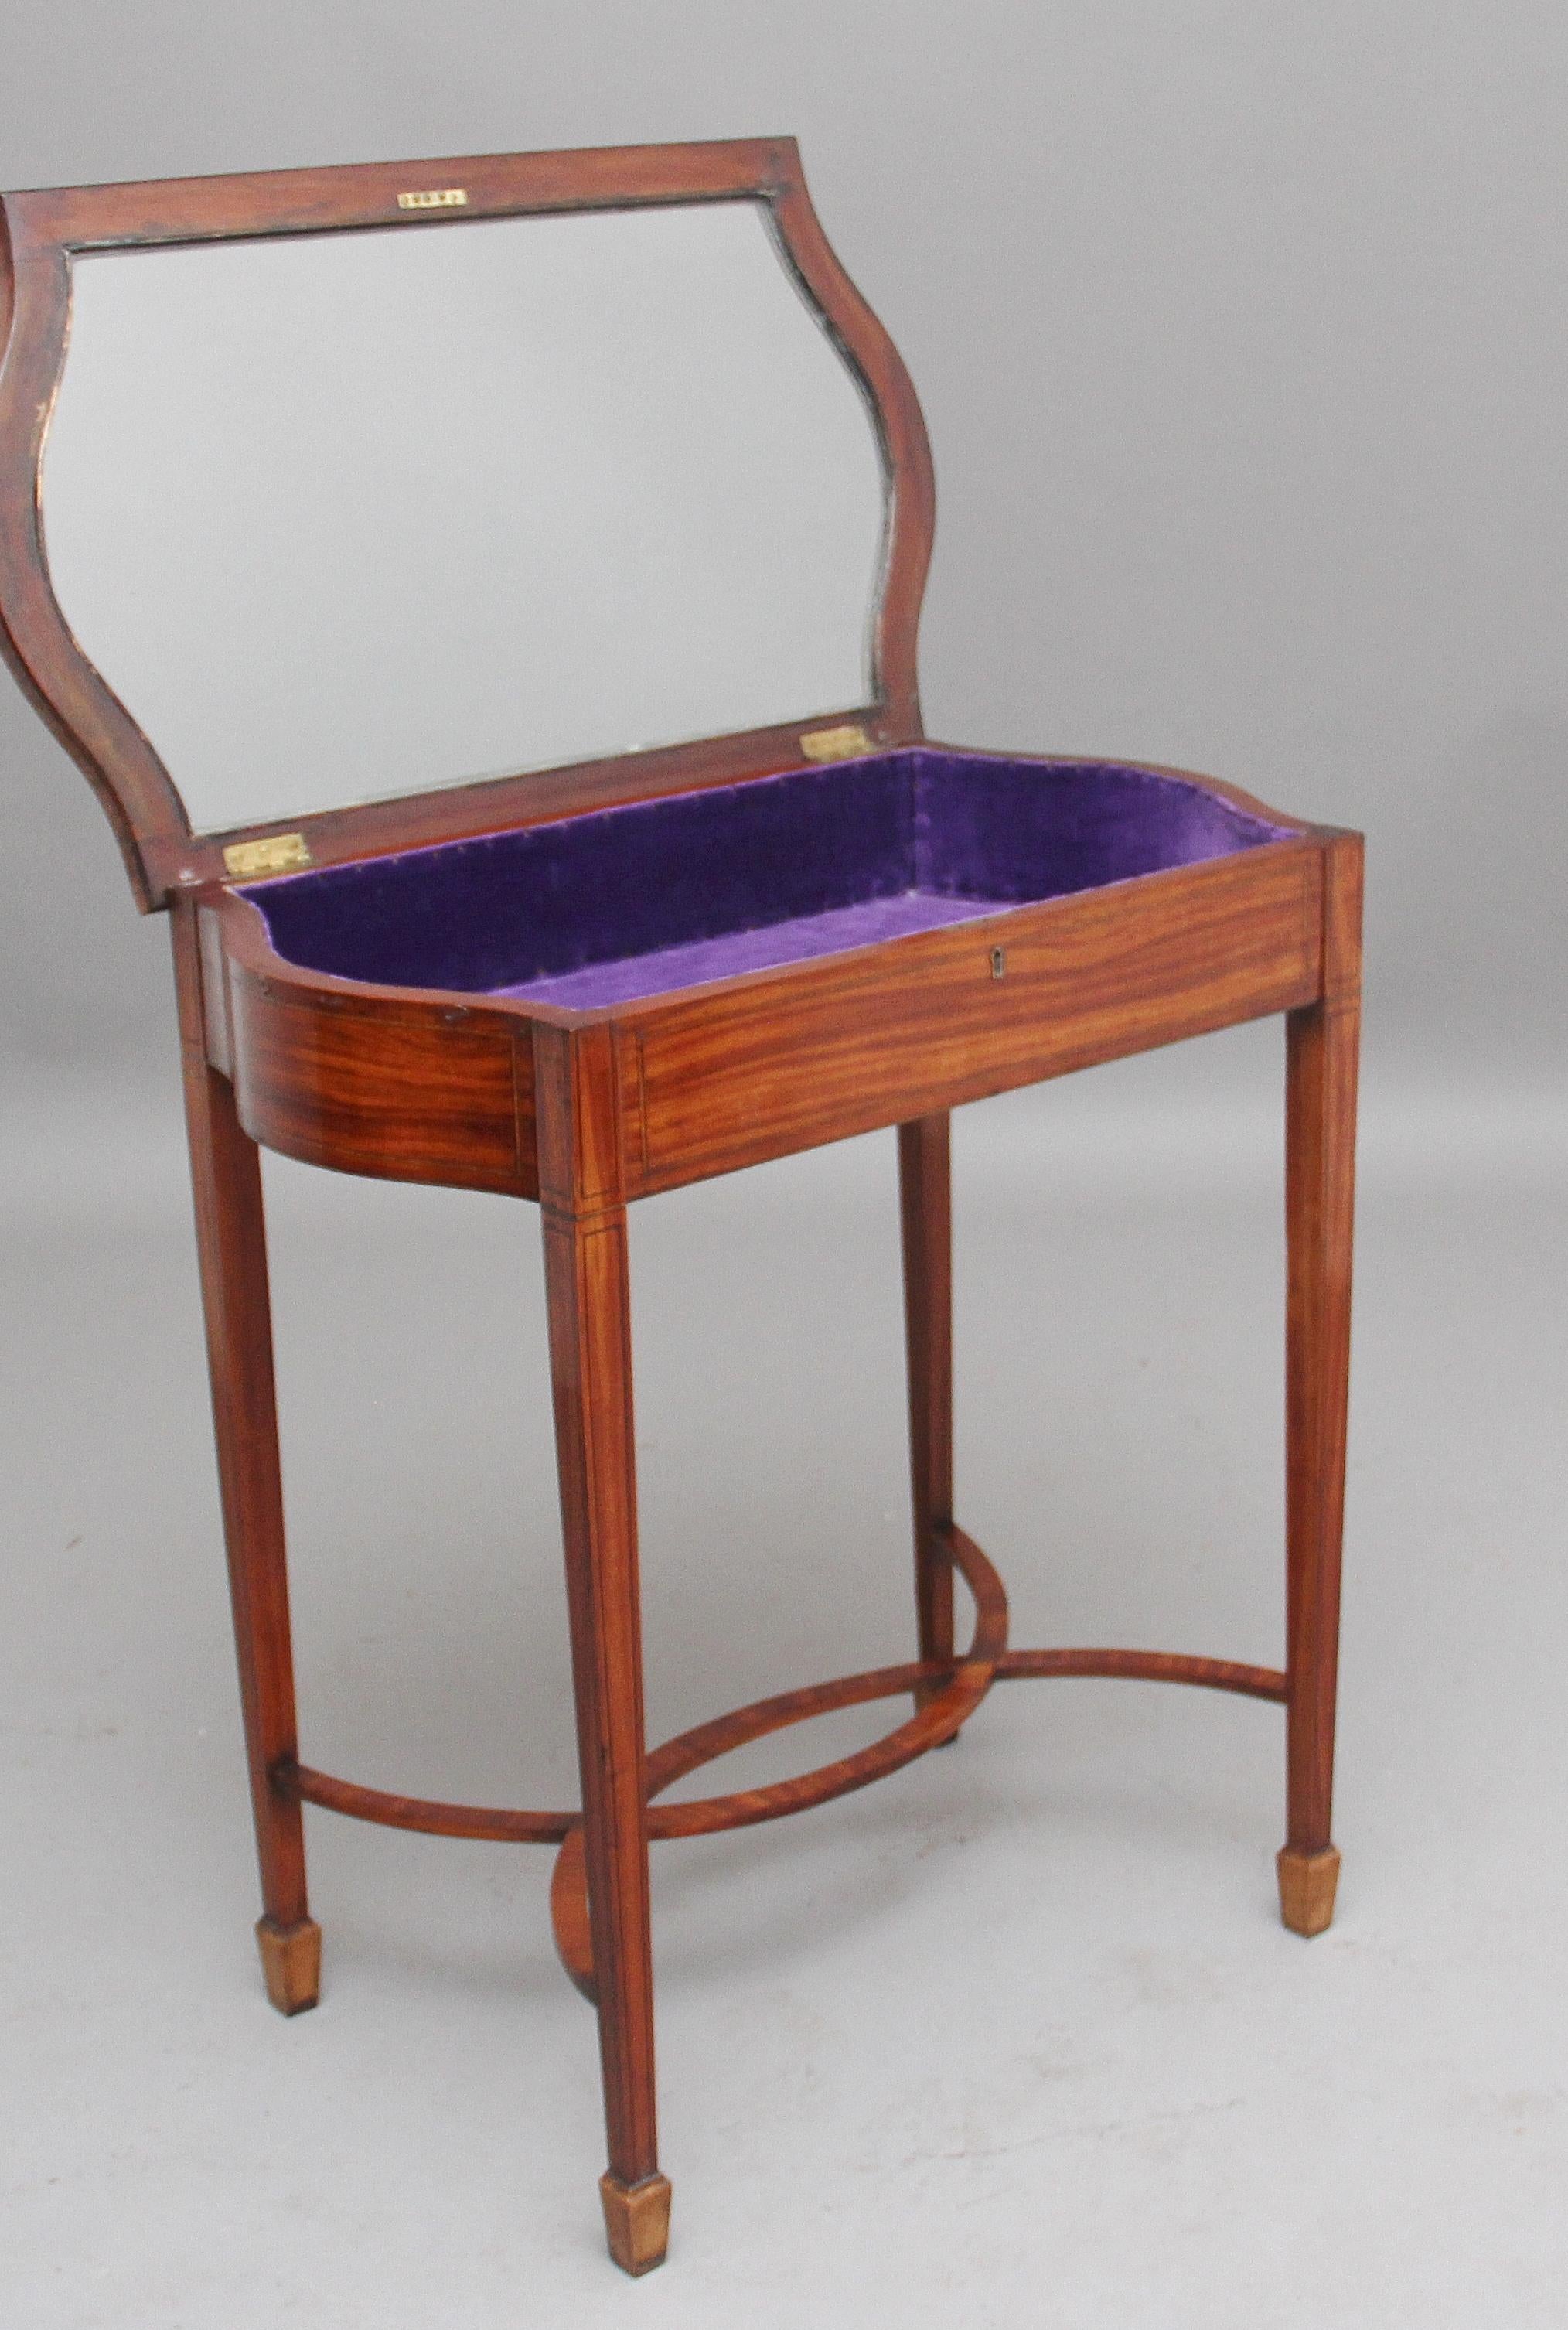 Early 20th century inlaid satinwood bijouterie / display table, the hinged lift up shaped glazed top opening to reveal the display area with a purple velvet lining inside, the top having shaped ends and decorated throughout with inlay, supported on